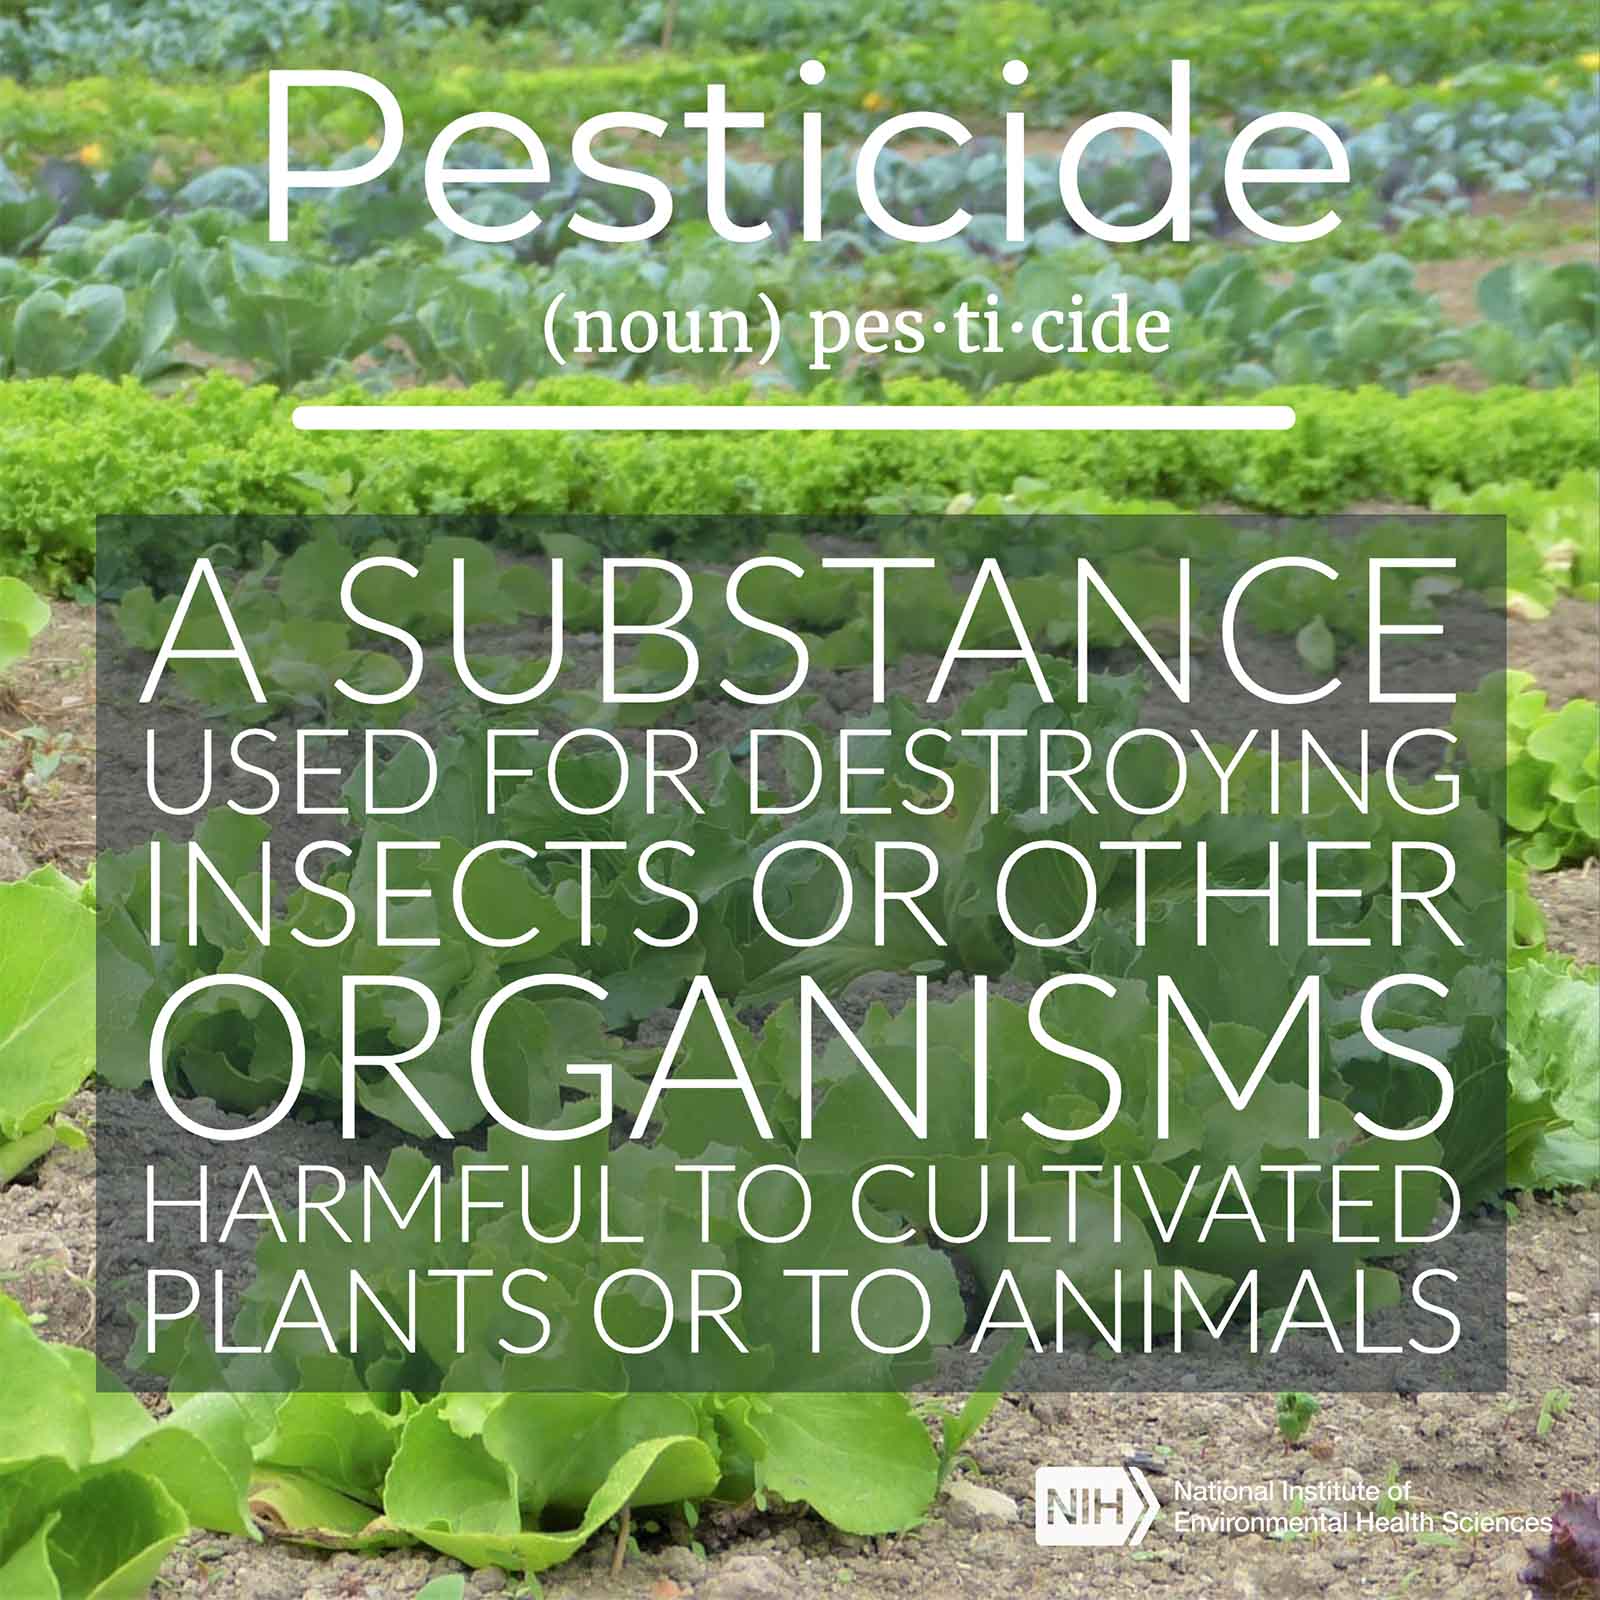 Pesticide (noun) described as a substance used for destroying insects or other organisms harmful to cultivated plants or to animals